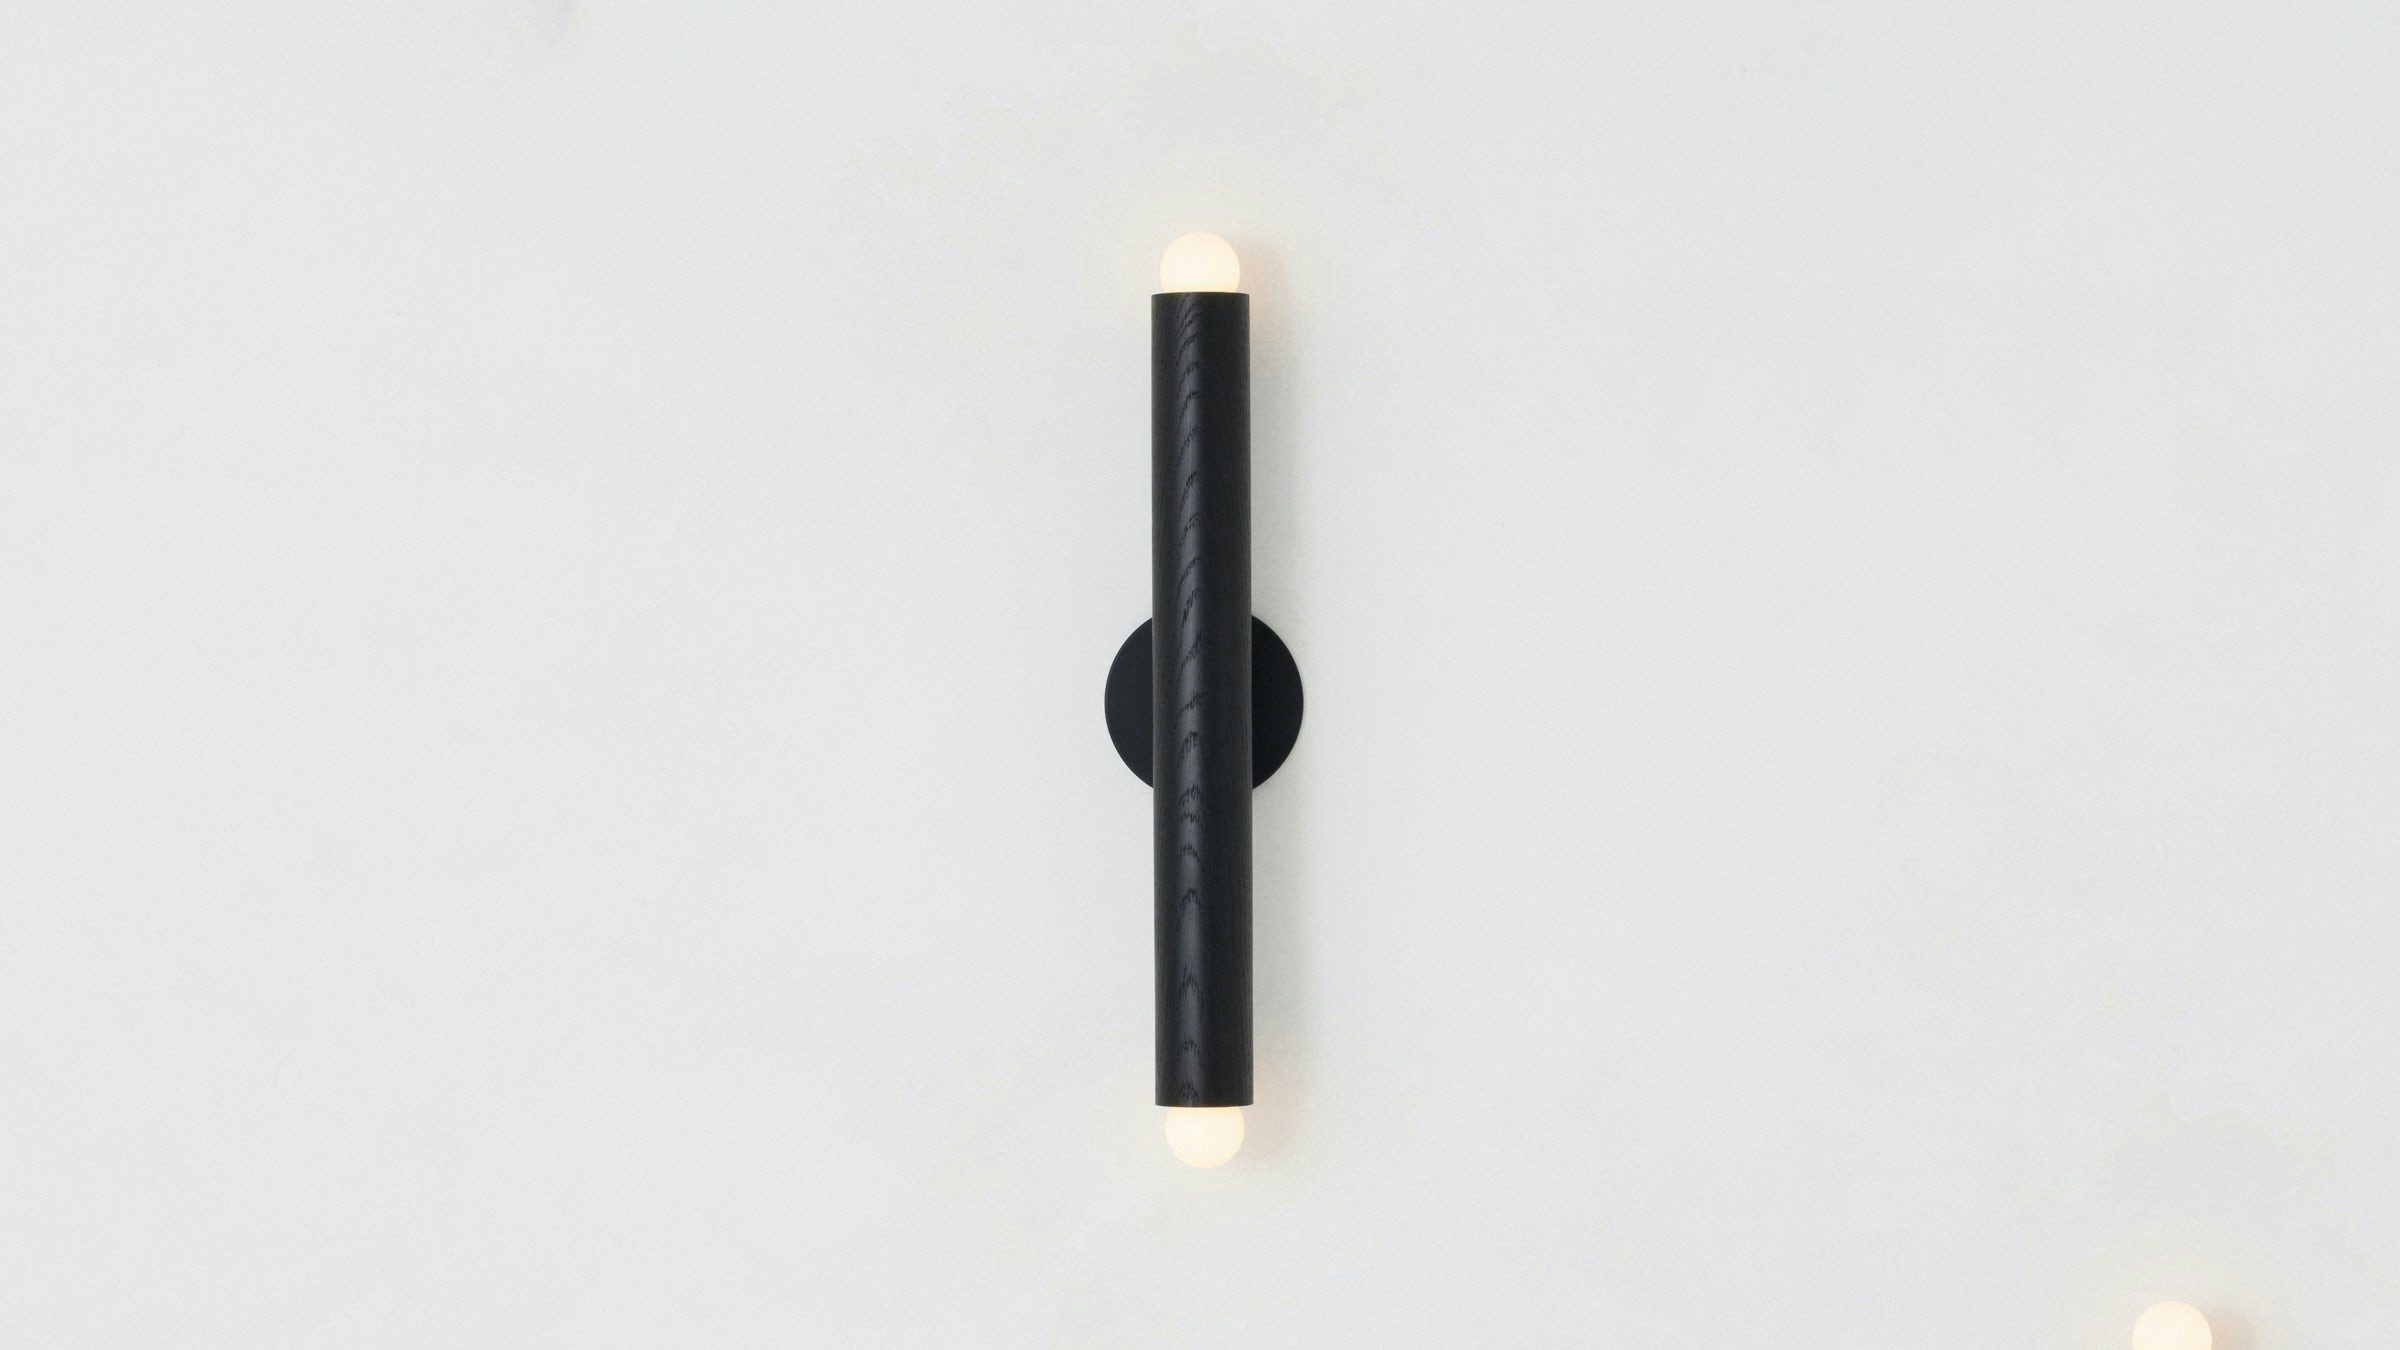 gallery image for Lodge_Linear-Sconce_Oxidized_Gallery_1